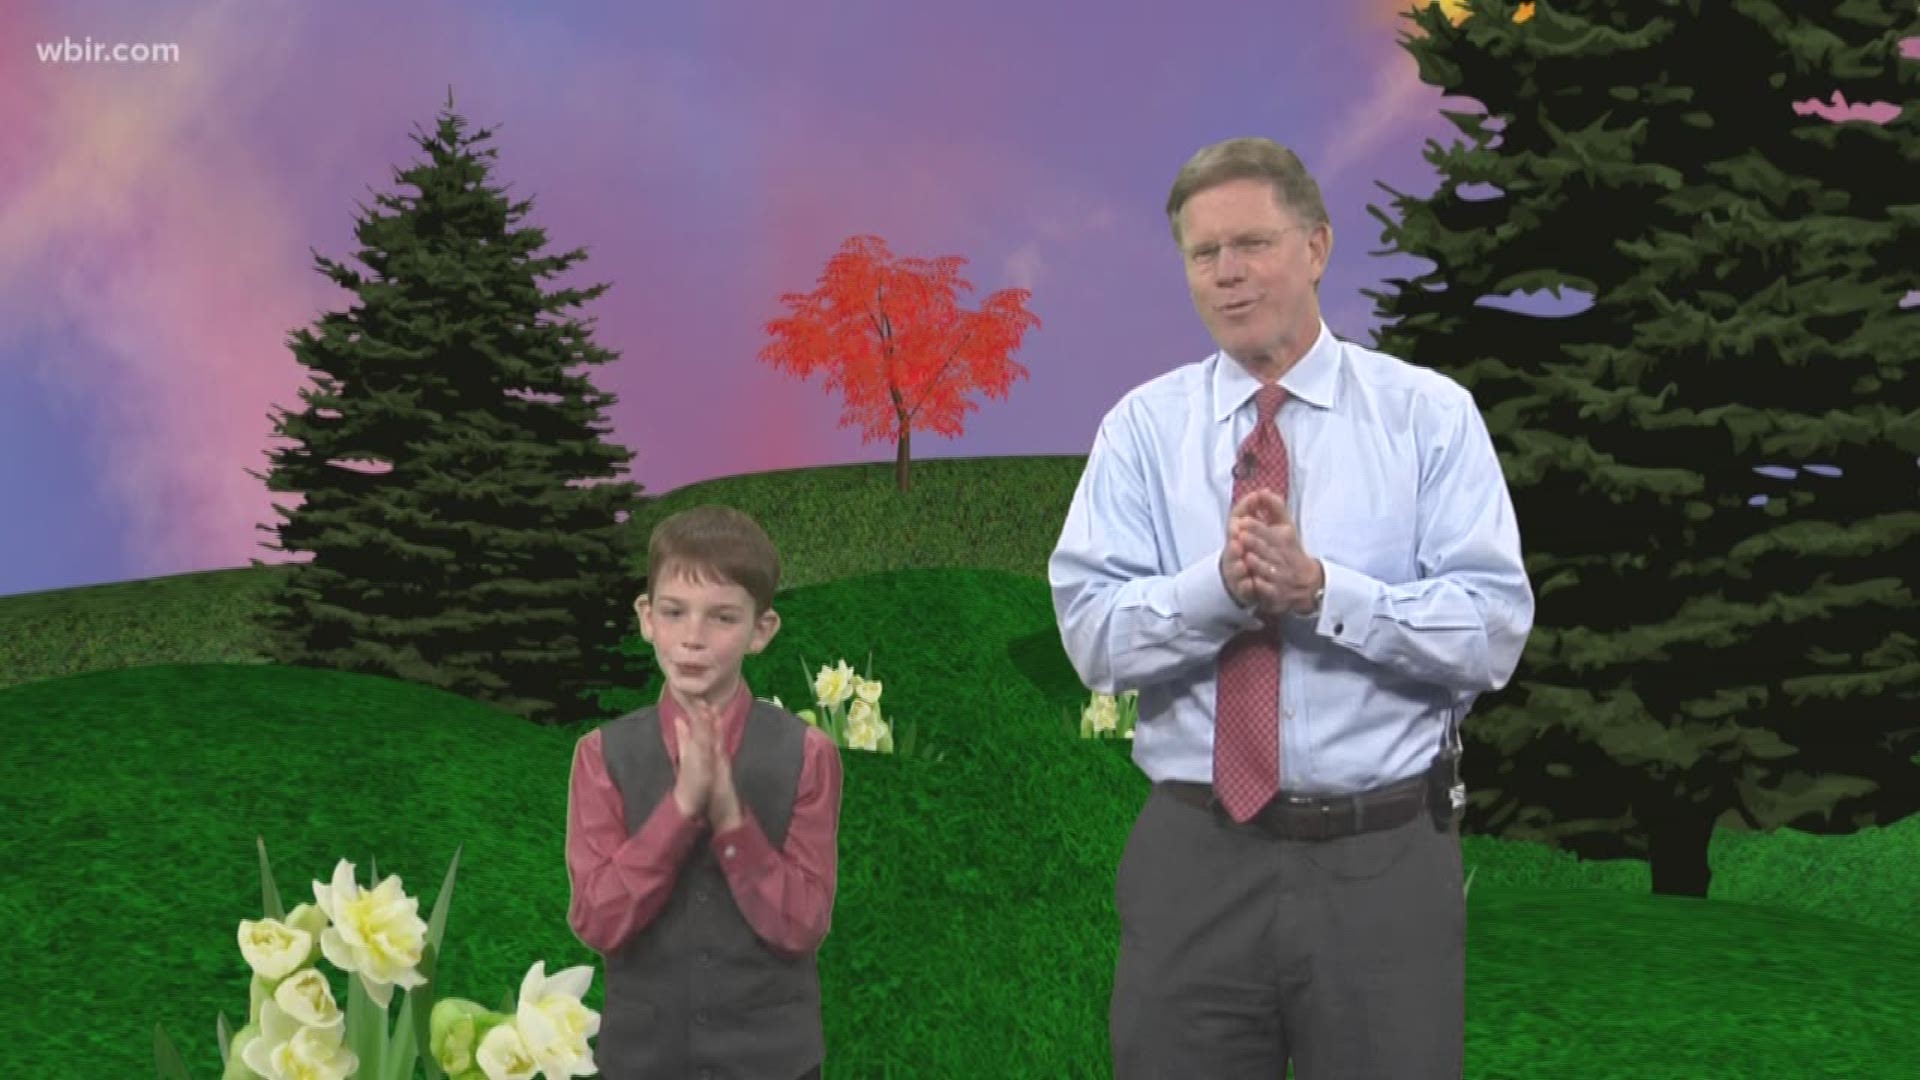 There's no denying that our Junior anchor loves weather. He had a chance to help Todd out and did a great job. March 19, 2019-4pm